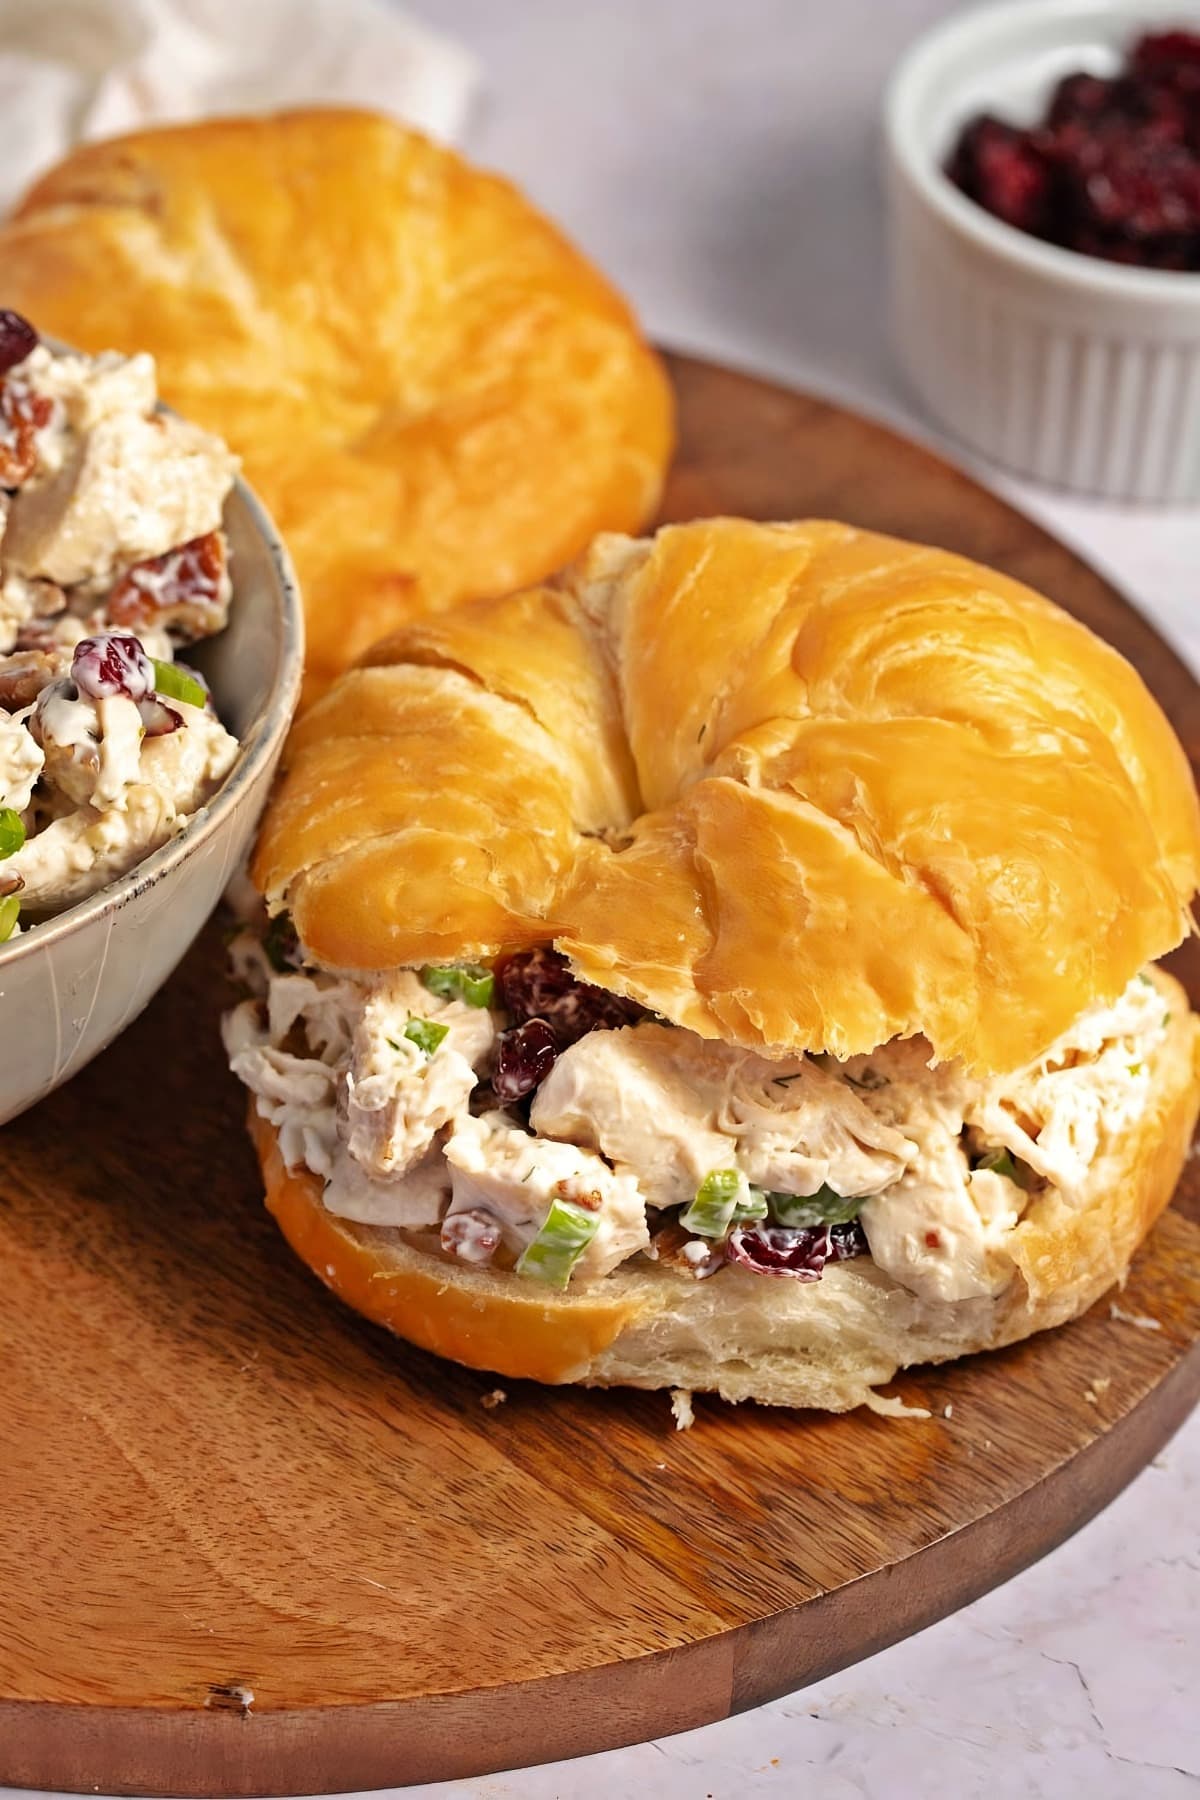 Bread Sandwich with salad filling made with chicken, mayonnaise, green onions, dried cranberries, chopped pecans, lime juice, and dried dill weed.